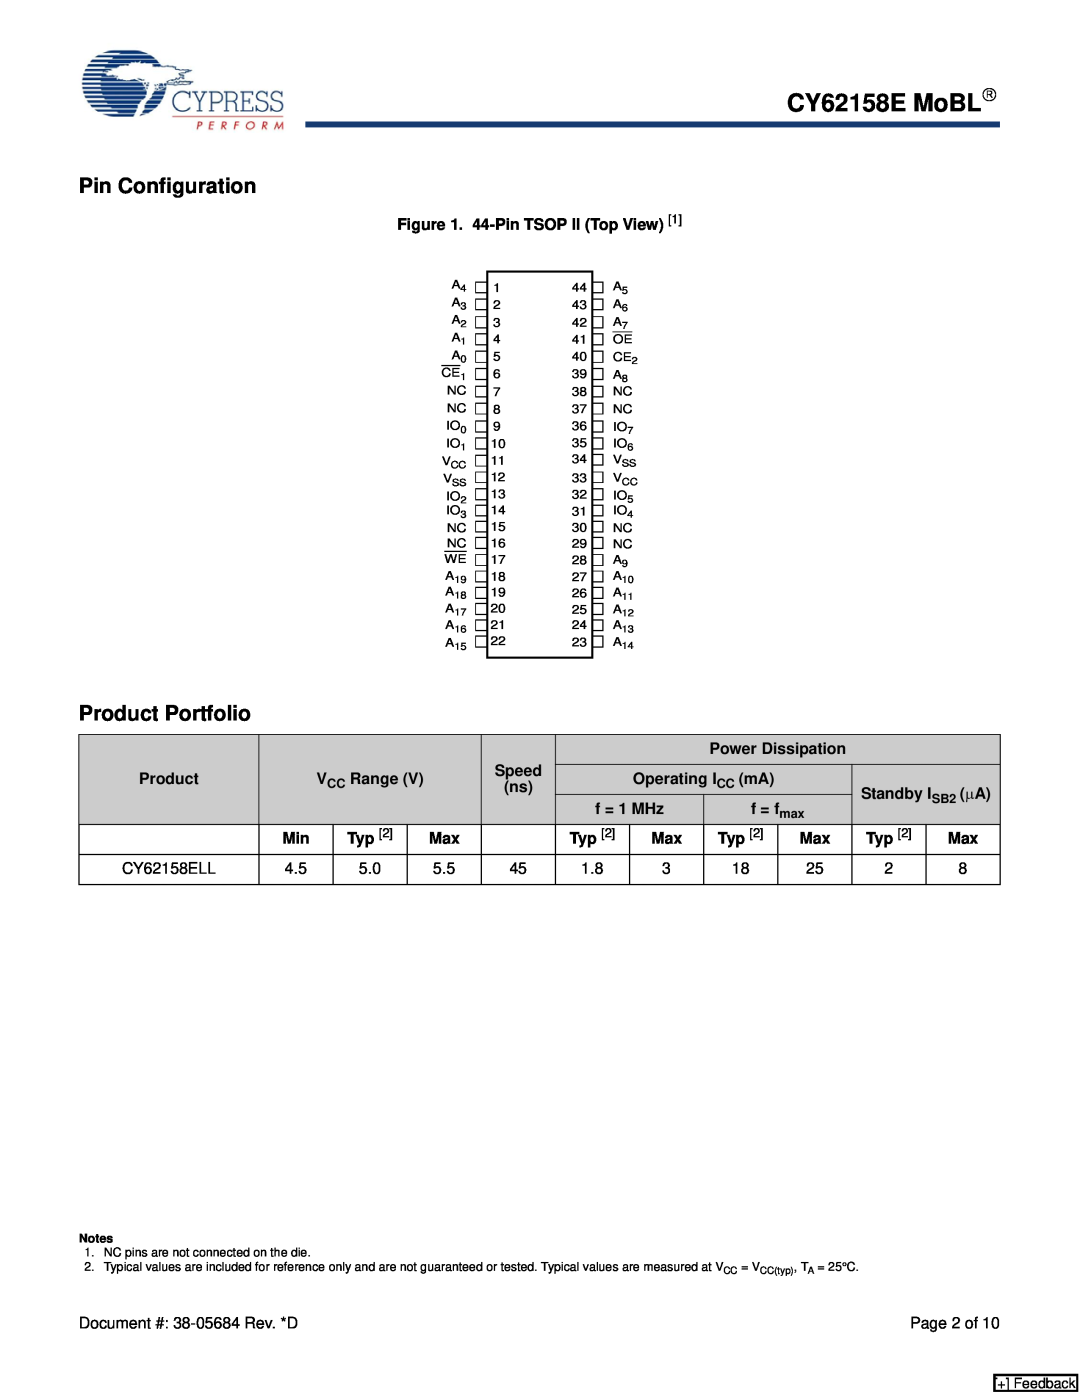 Cypress manual Pin Configuration, Product Portfolio, CY62158E MoBL→, Page 2 of 